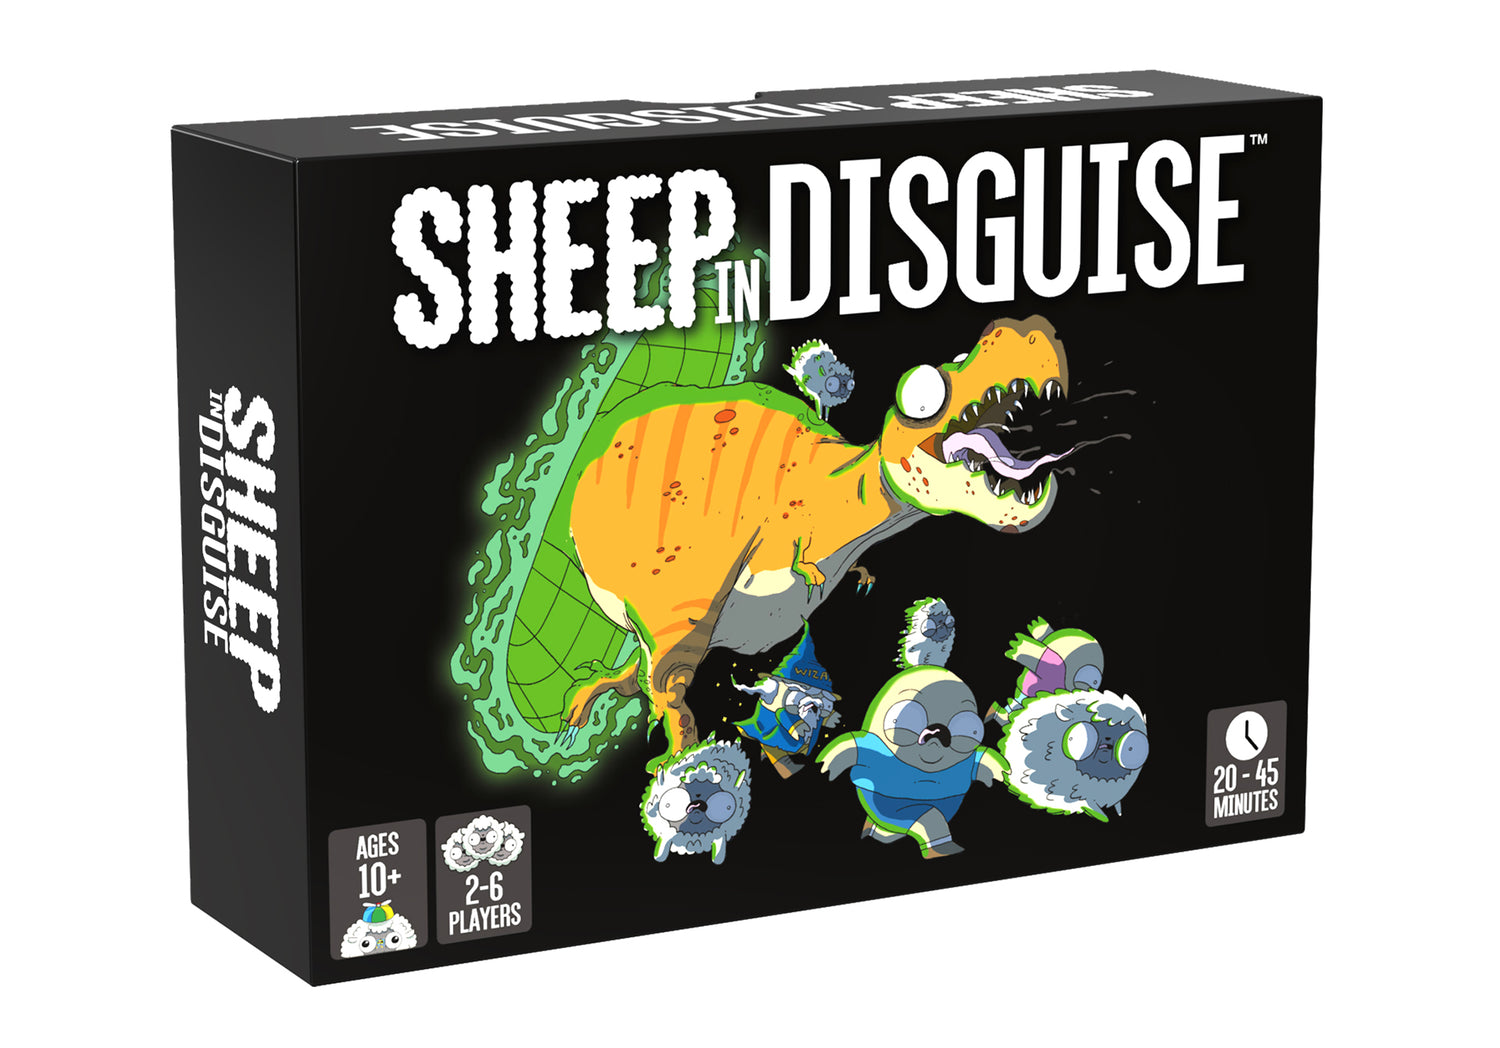 Sheep in Disguise